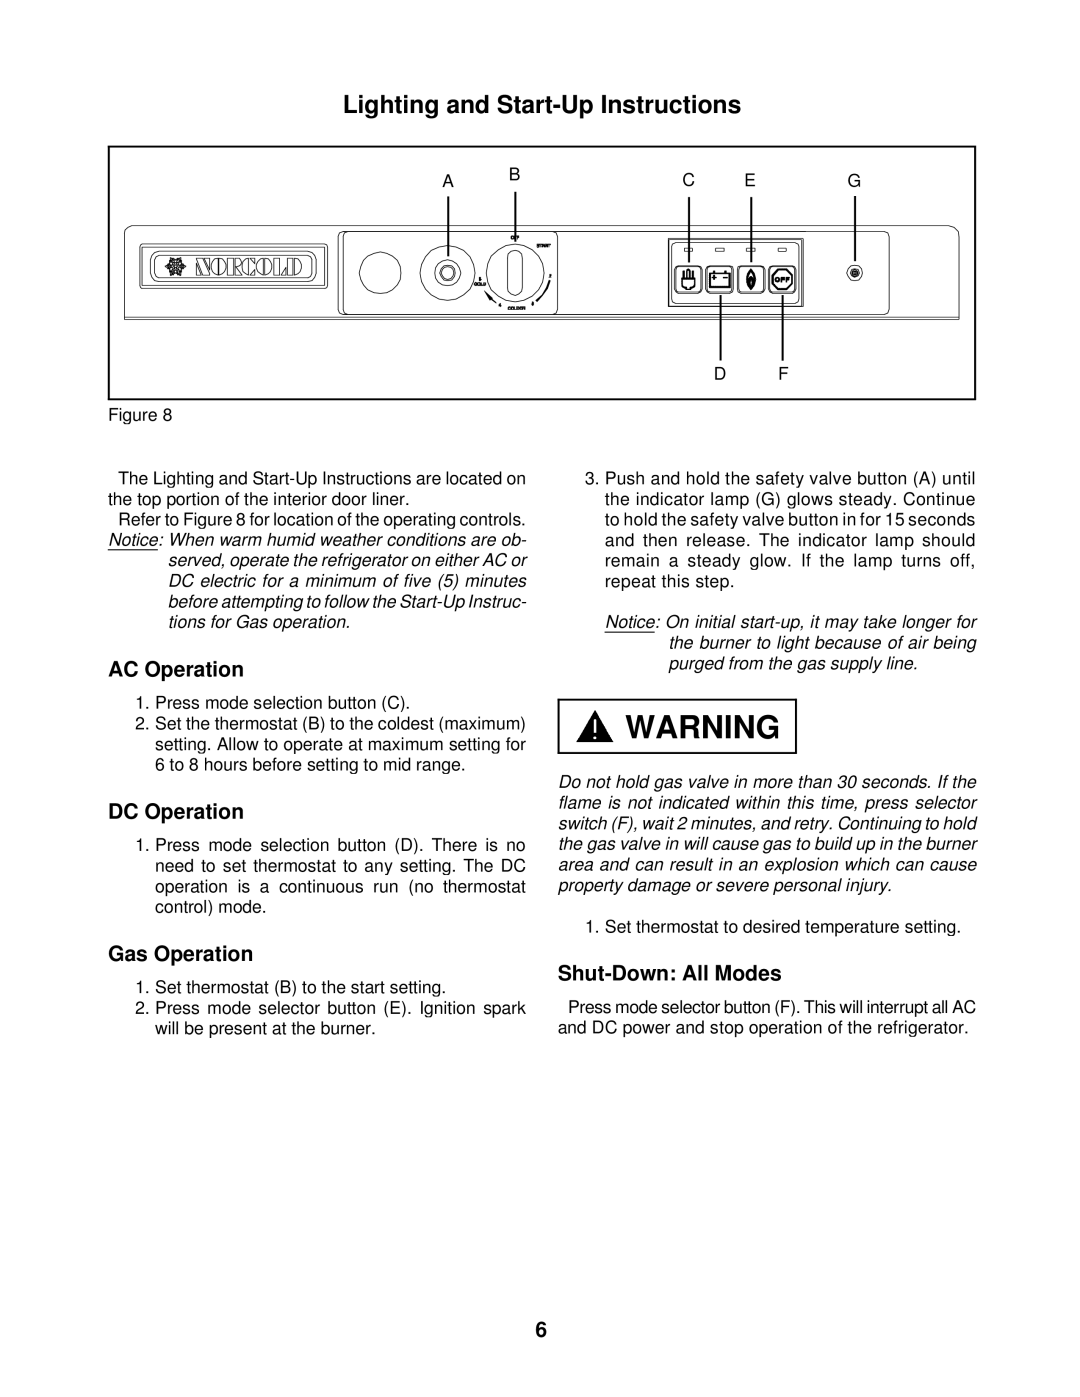 Bryant 3163 Lighting and Start-Up Instructions, AC Operation, DC Operation, Gas Operation, Shut-Down All Modes 